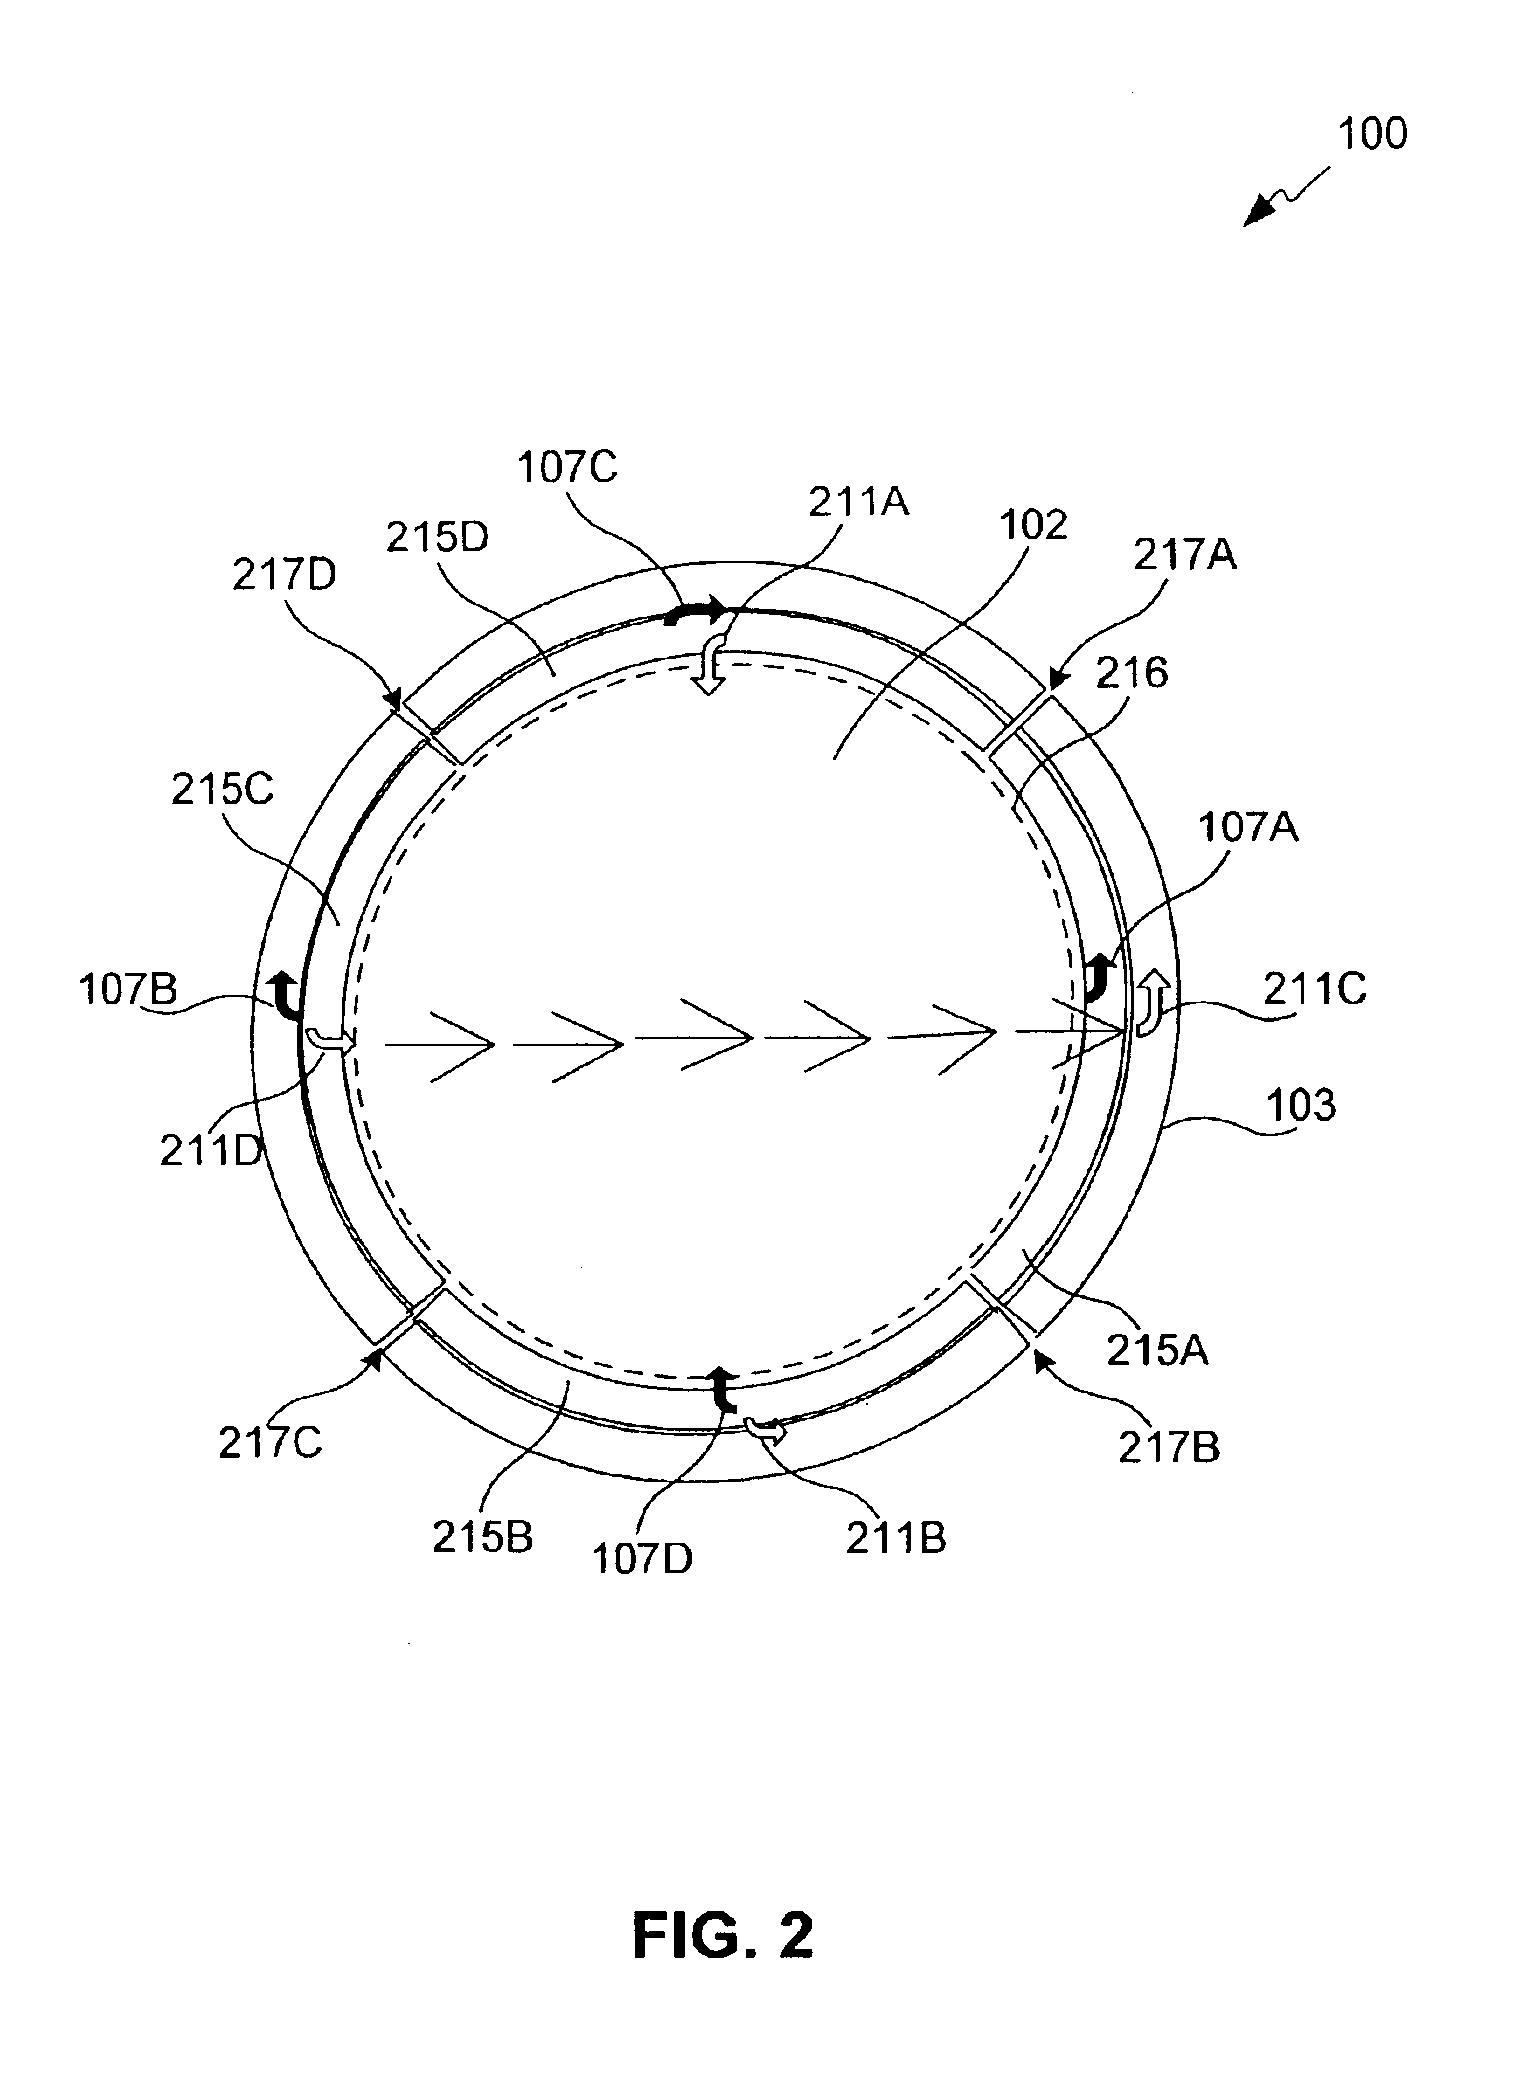 Immersion photolithography system and method using microchannel nozzles